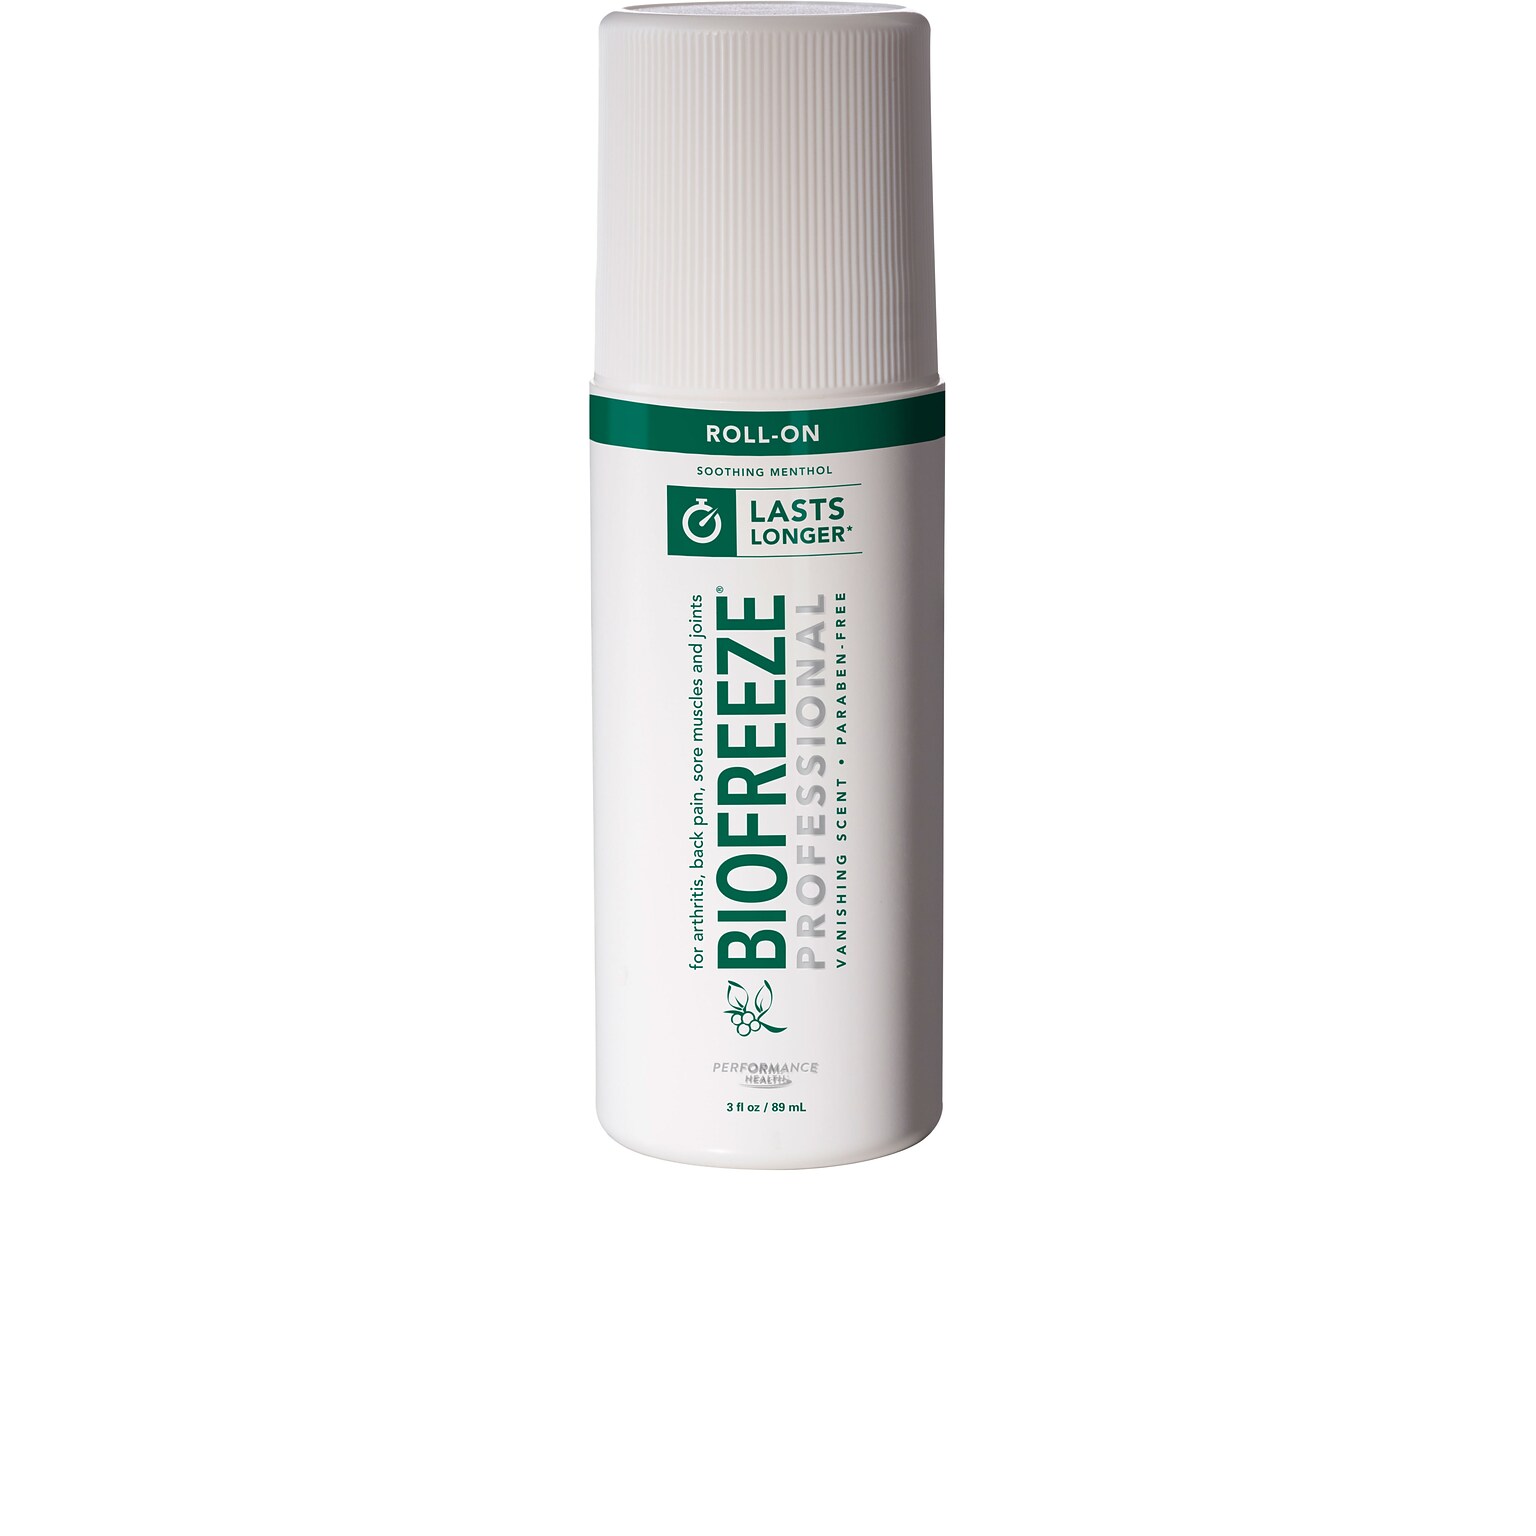 BIOFREEZE® Profesional Pain-Relieving Products; 3oz. Roll-On, 12-Pack